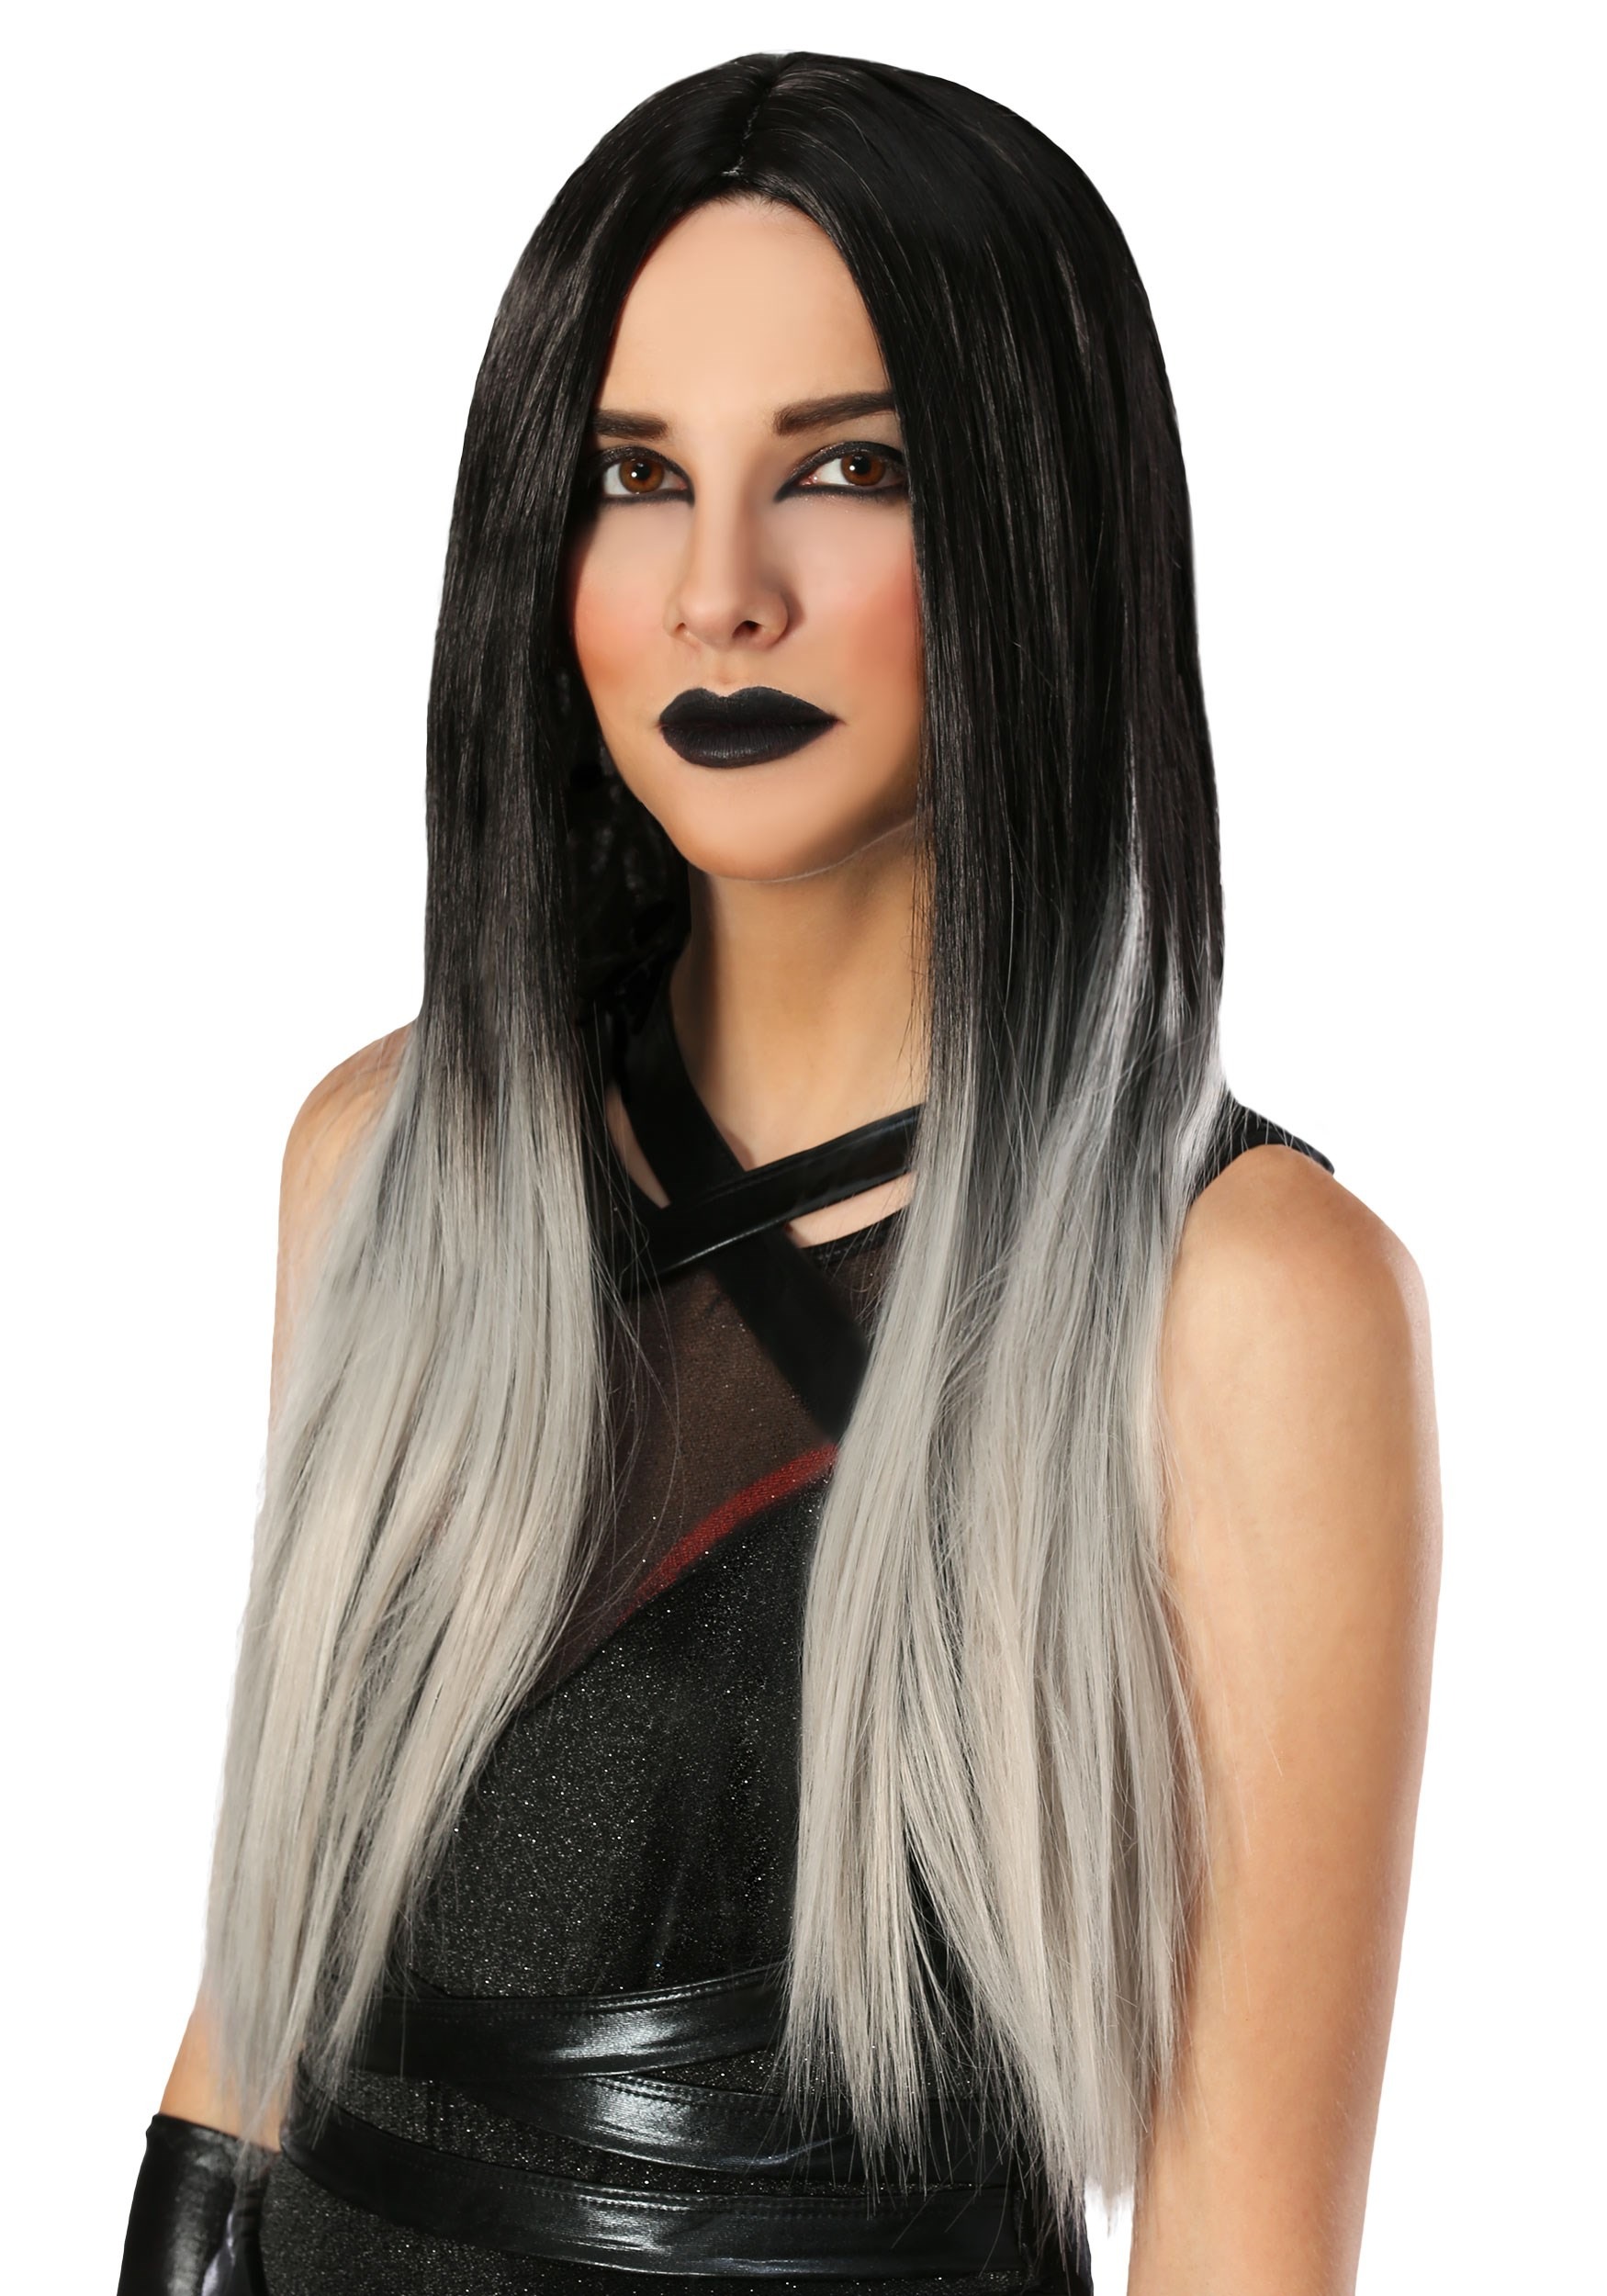 https://images.halloweencostumes.com/products/42279/1-1/womens-black-and-grey-ombre-wig.jpg